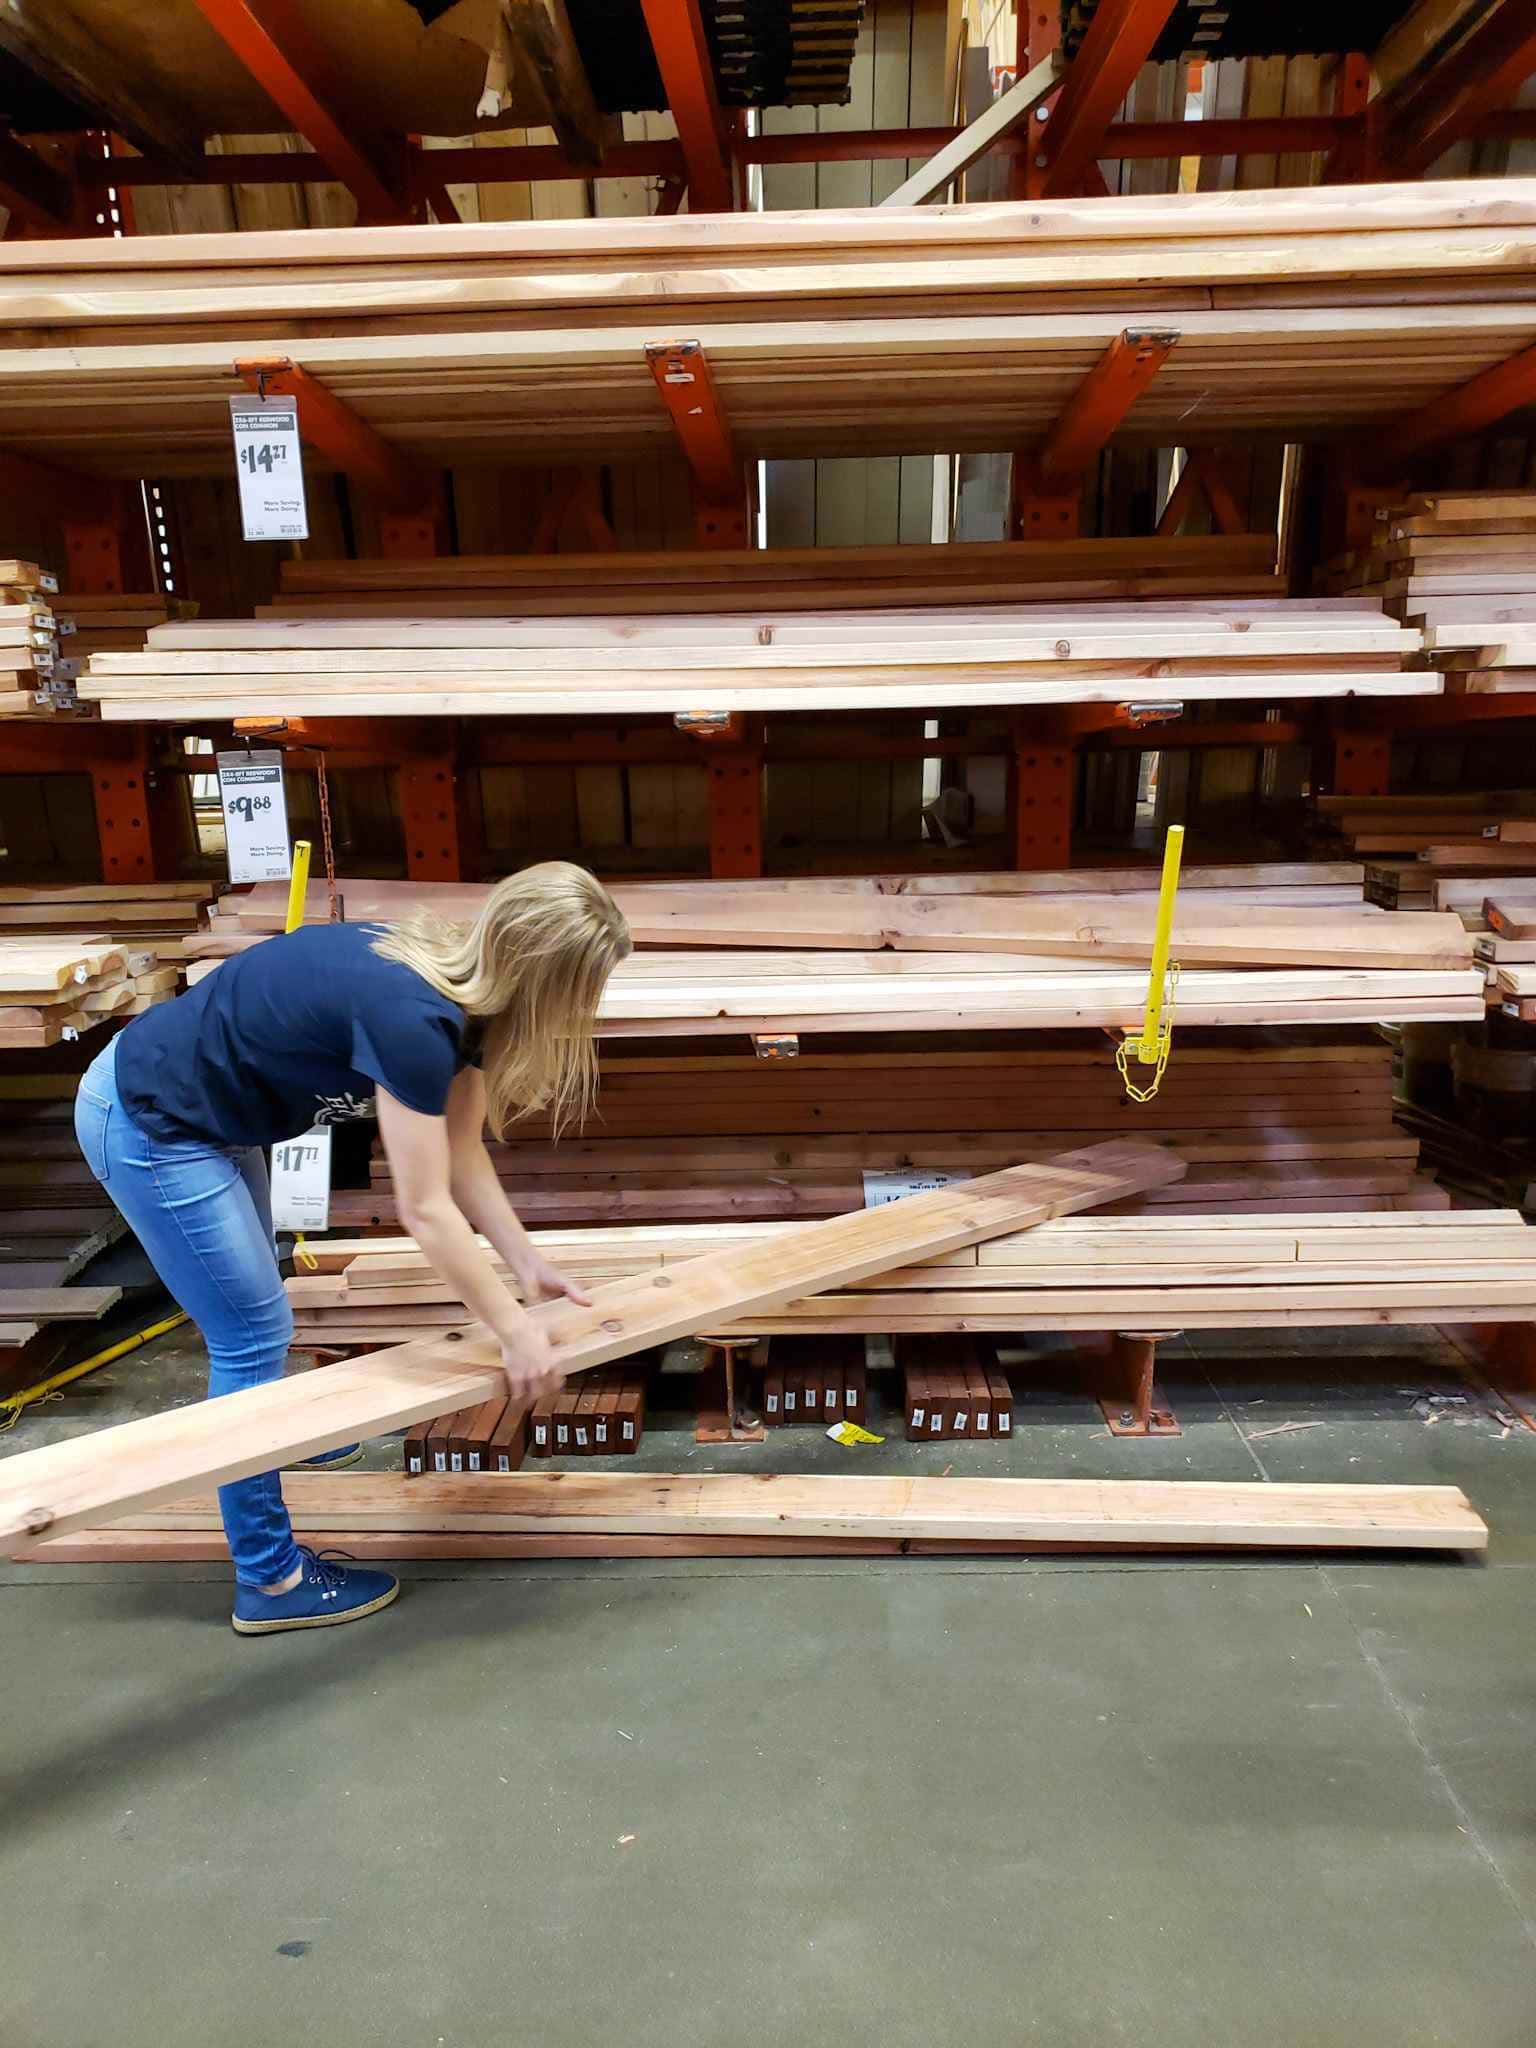 DeannaCat is grabbing a redwood 2x6 board for inspection from a shelf full of boards. There are multiple shelfs with varying sizes and wood materials that spans a height of at least 8 feet. 